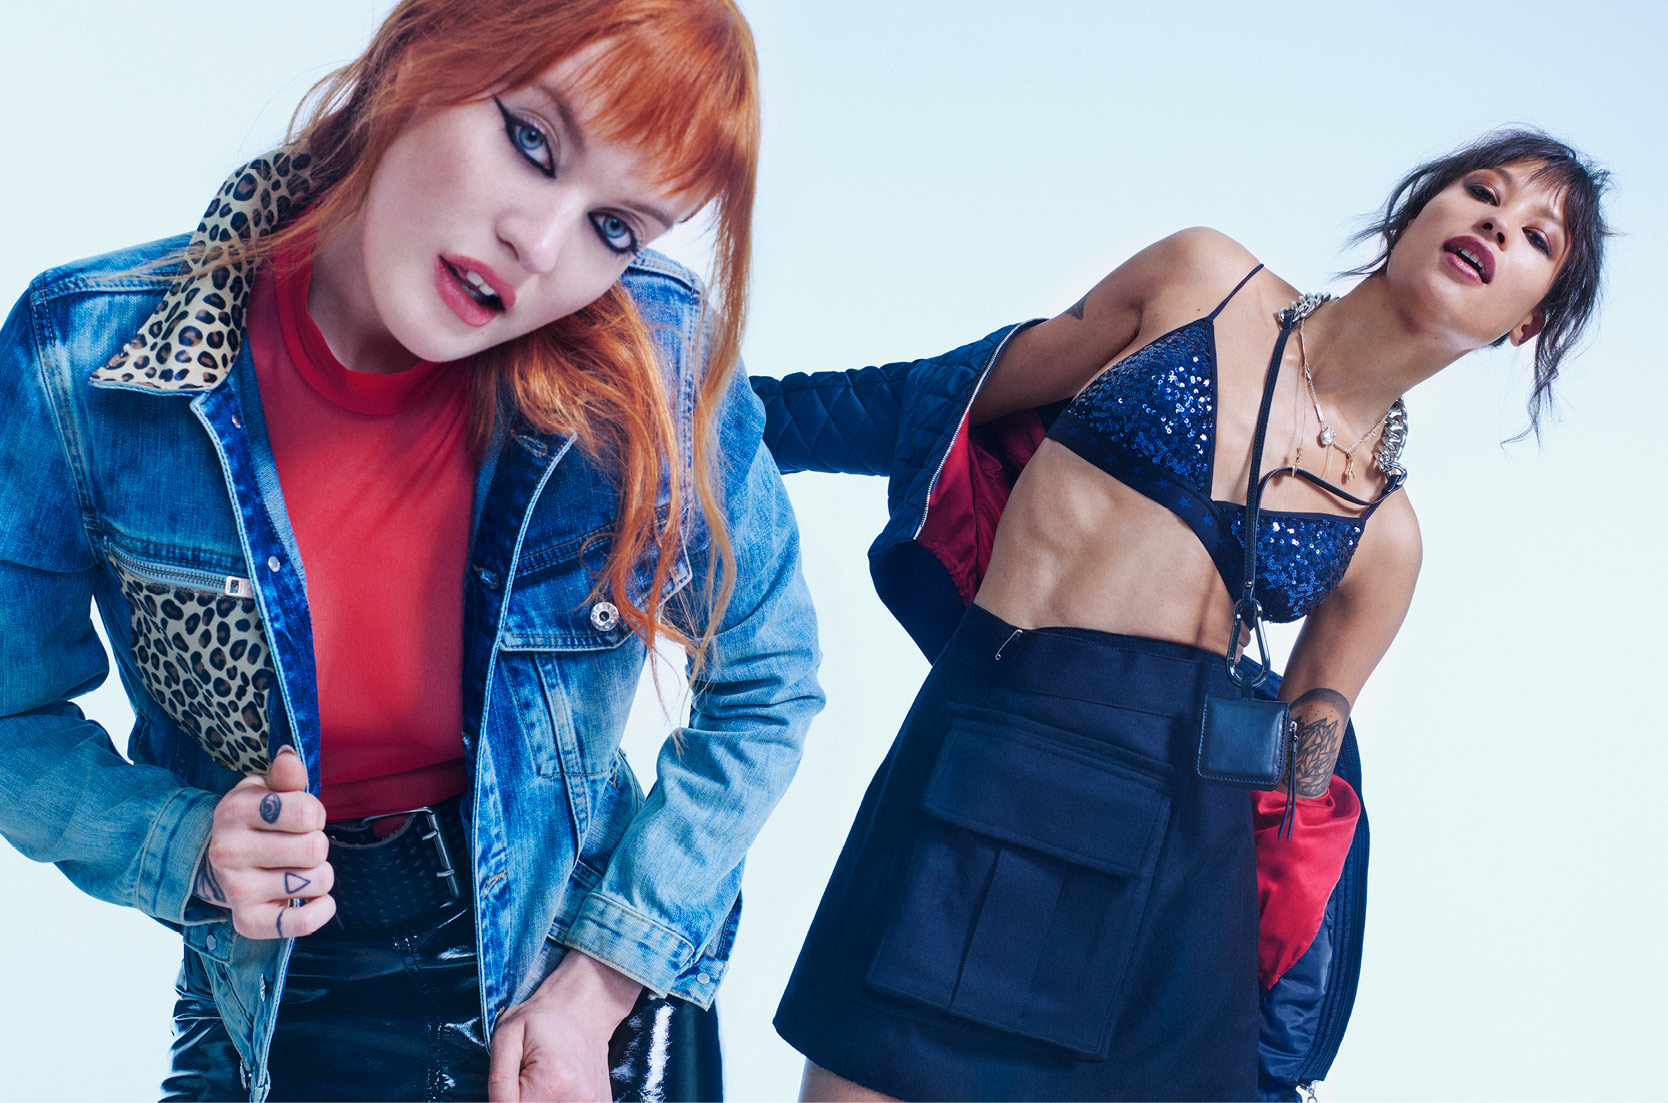 flicker besøg Oh Interview: Icona Pop (SWE) on "Next Mistake", Sweden's music scene and  coming to Australia - The AU Review